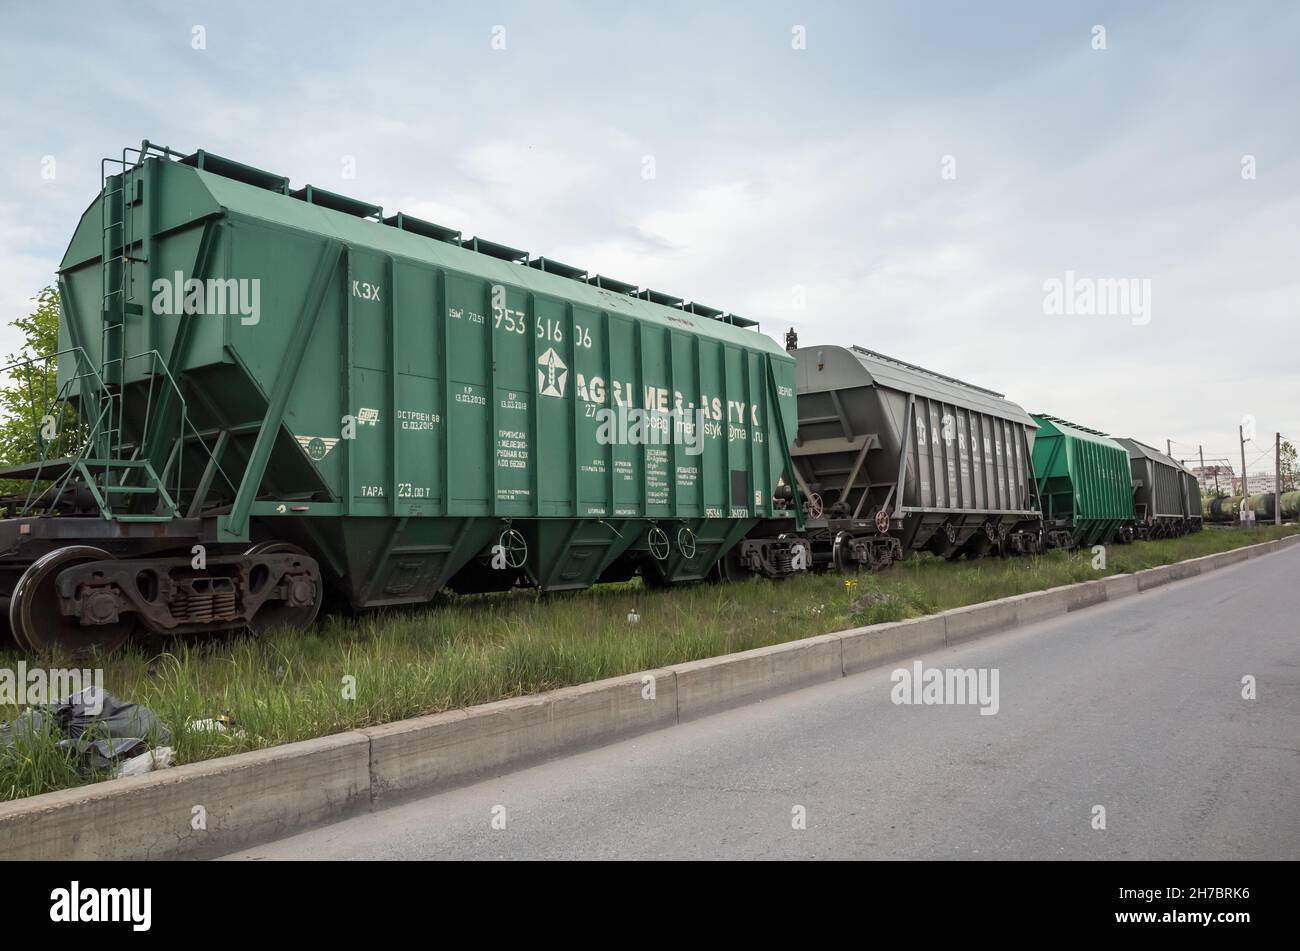 St-Petersburg, Russia - June 8, 2017: Green industrial cargo railway cars stand on a railroad on a daytime Stock Photo